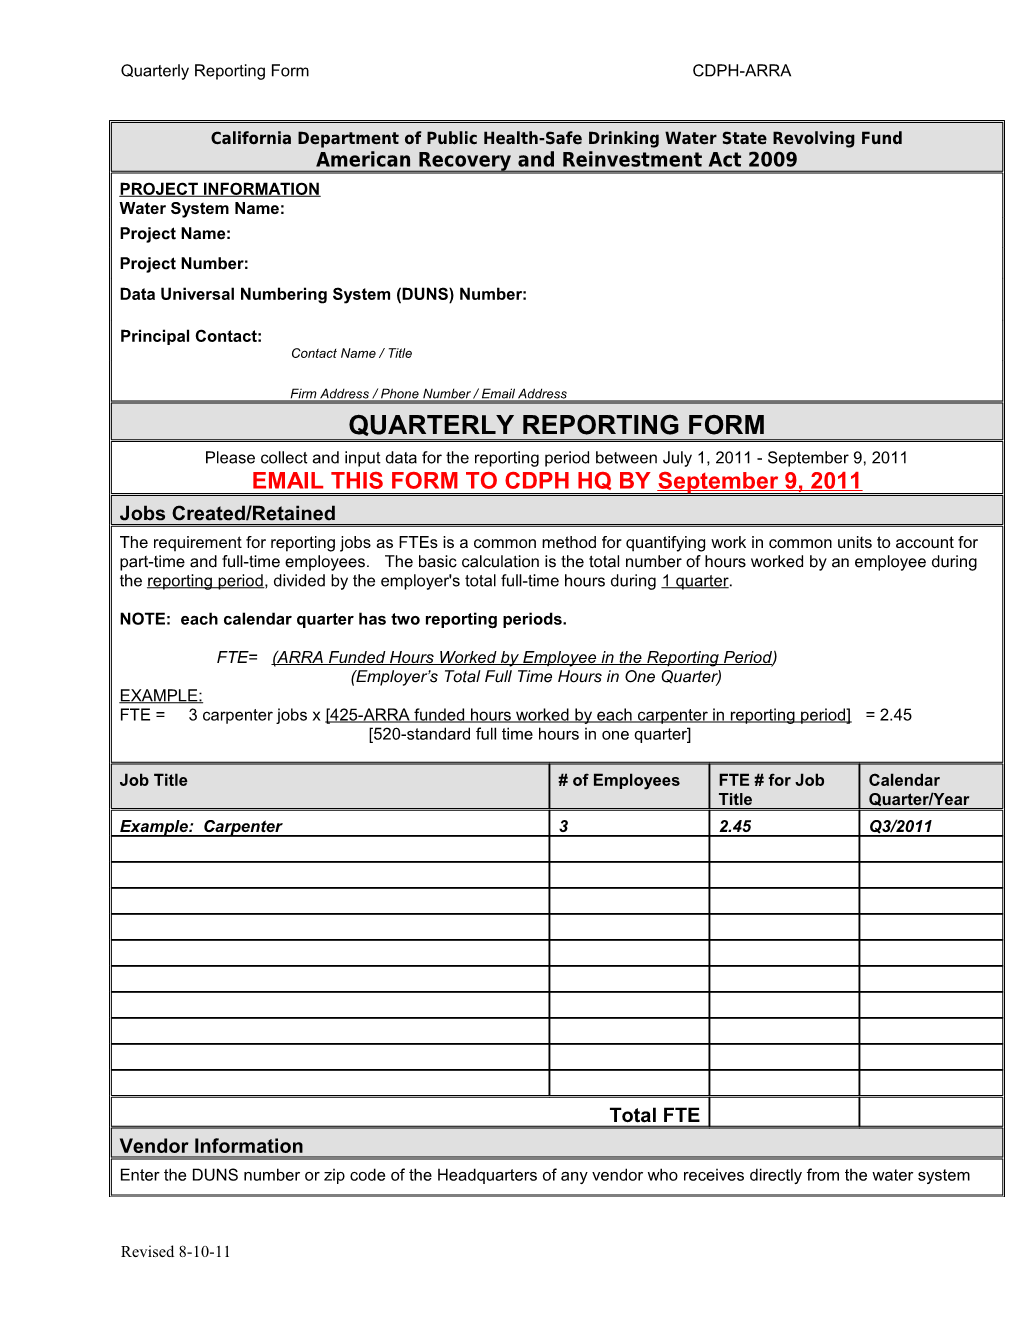 (FINAL) REPORTING-Quarterly Reporting Form REVISED 8-10-11